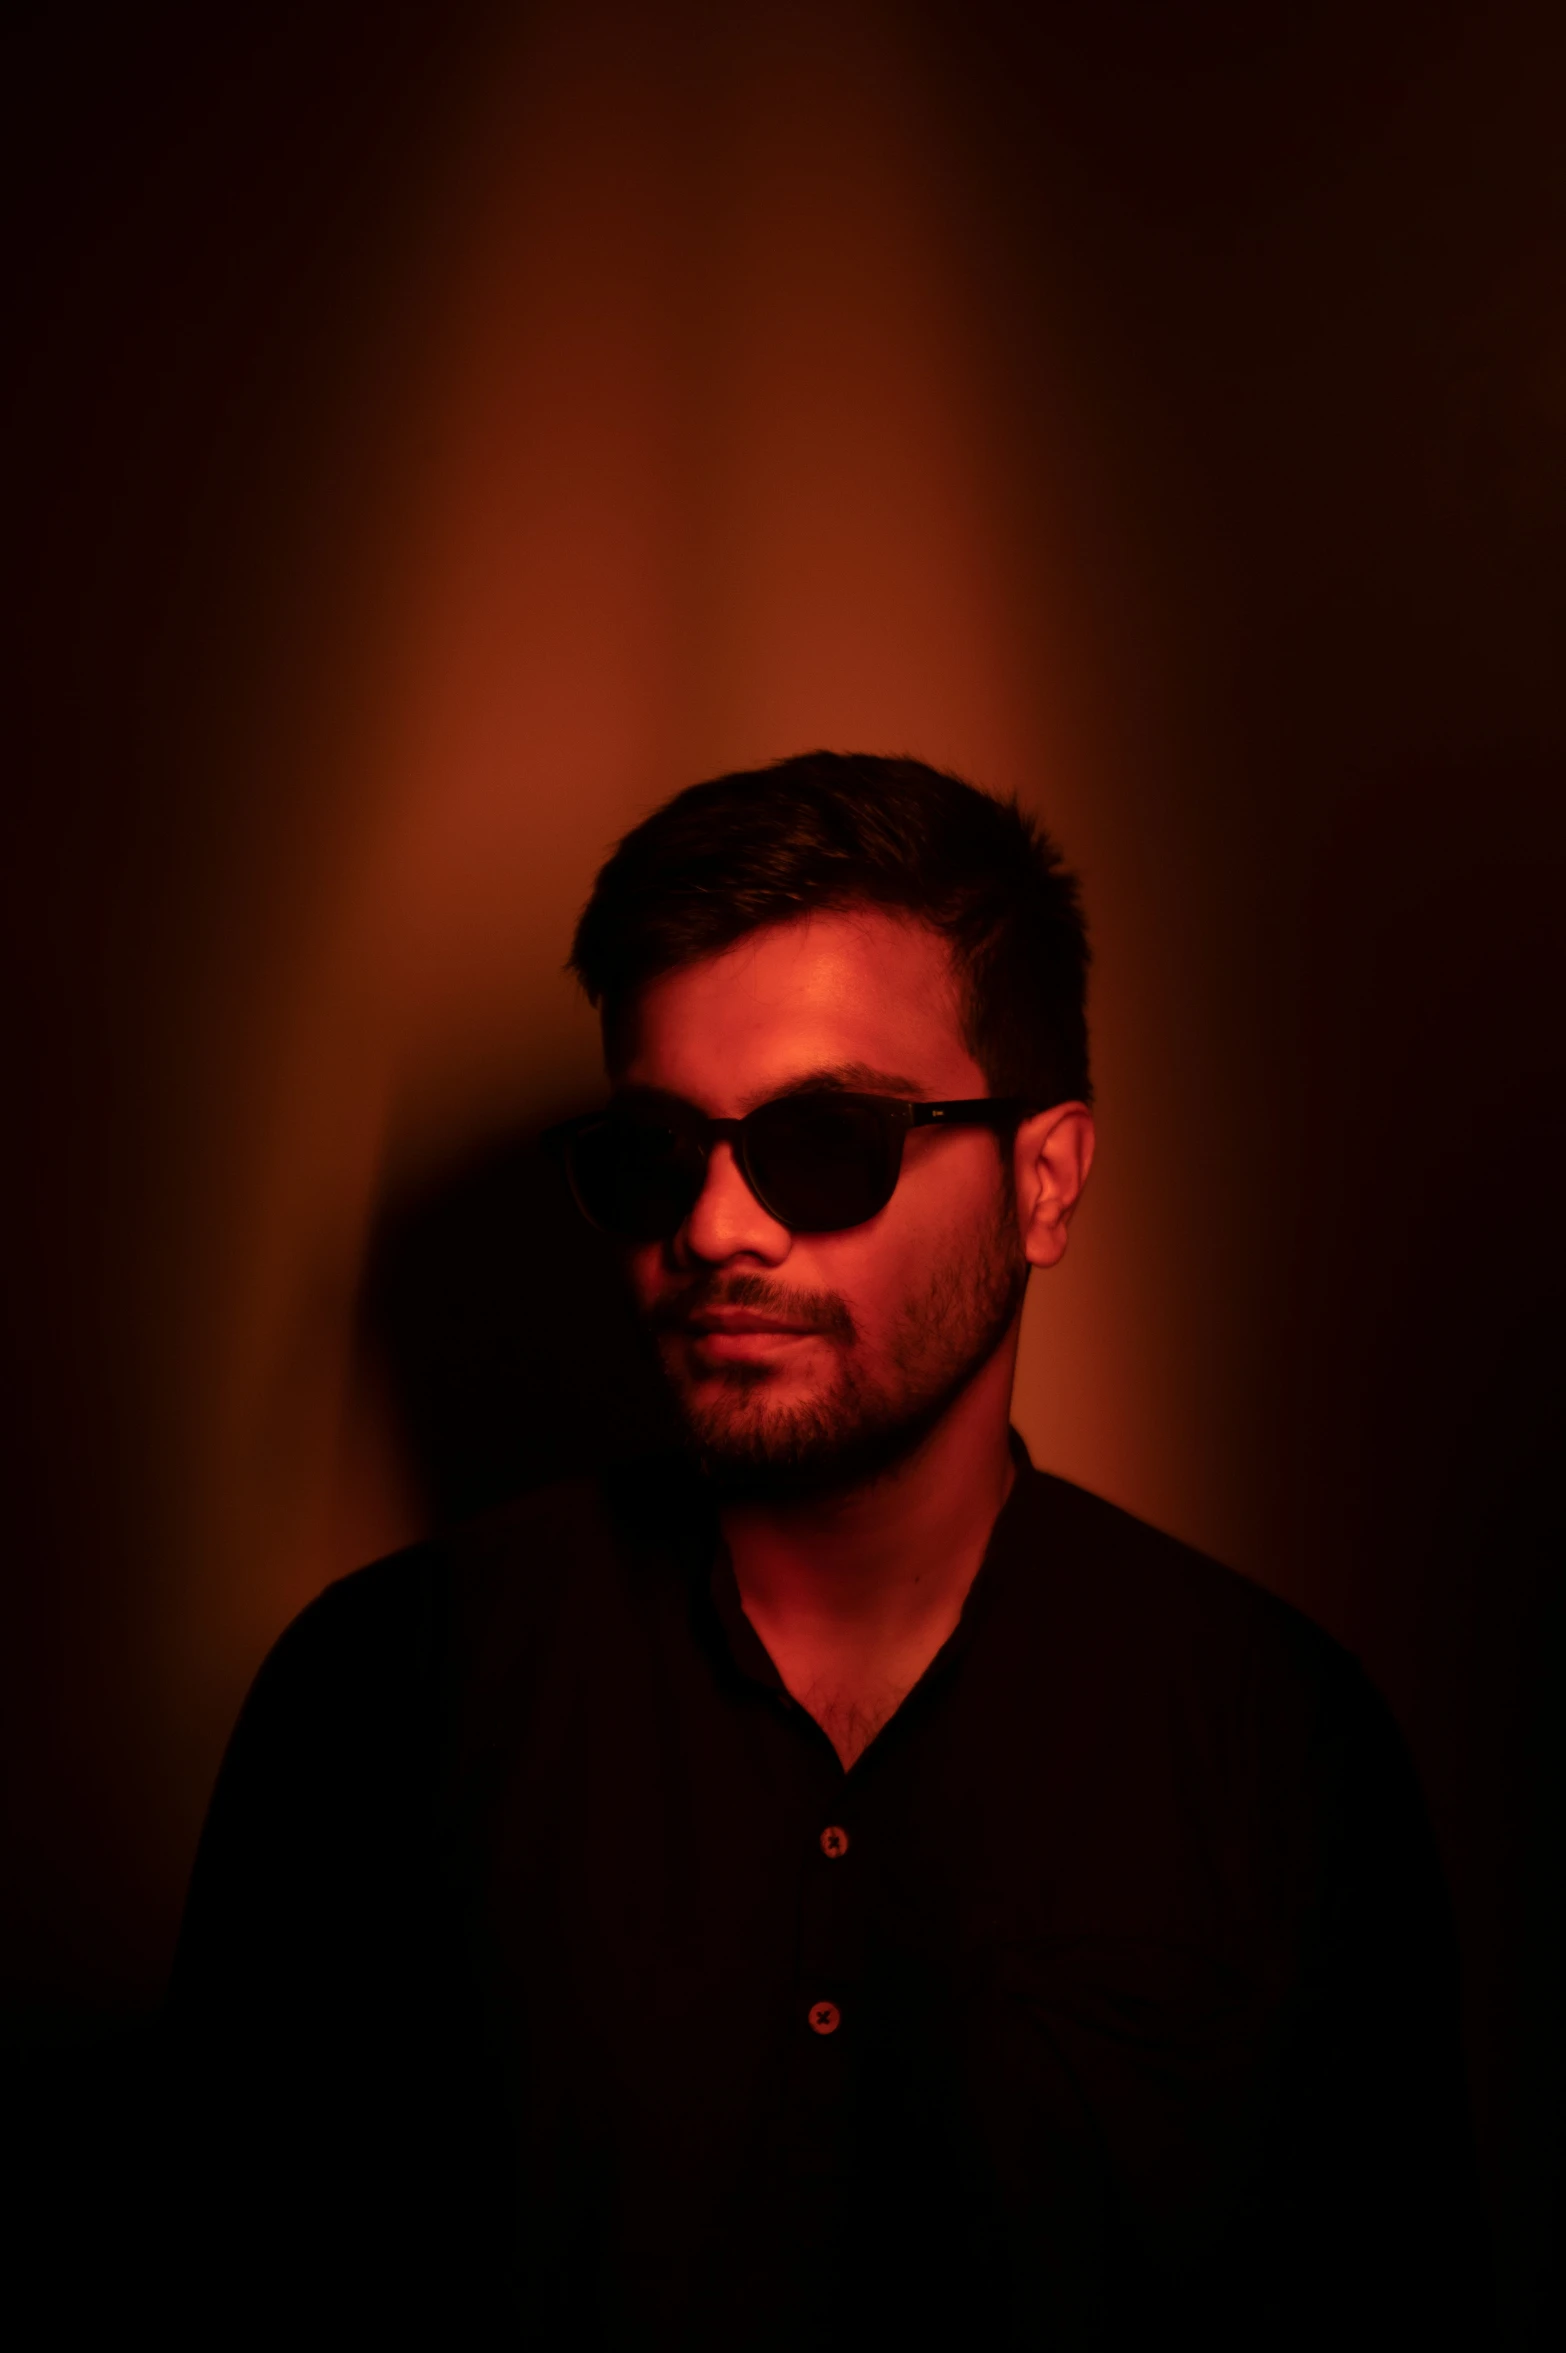 a young man with dark sunglasses looks into the camera